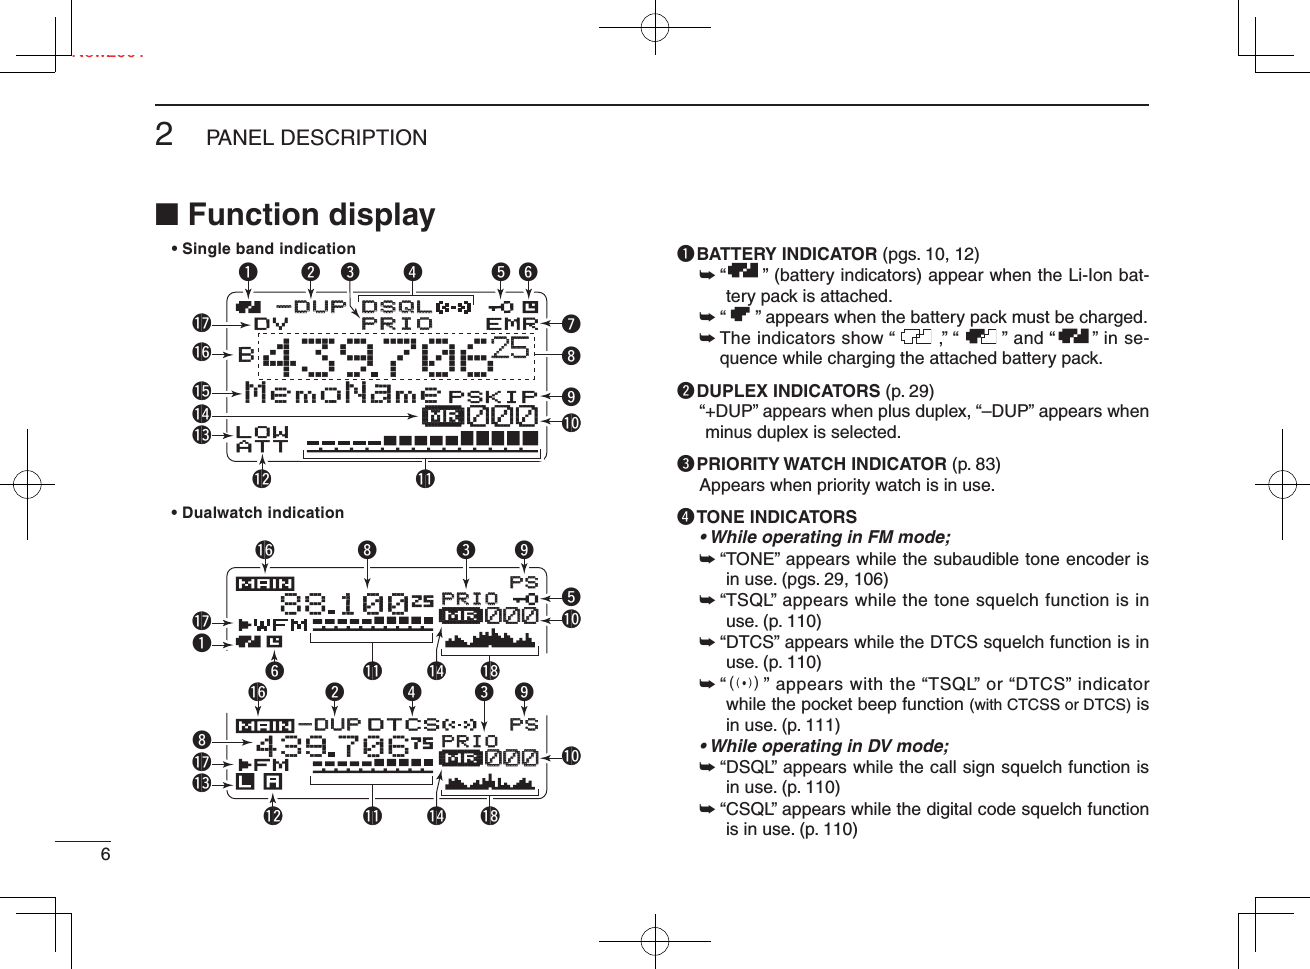 62PANEL DESCRIPTIONNew2001 Ne■ Function displayq BATTERY INDICATOR (pgs. 10, 12)➥ “       ” (battery indicators) appear when the Li-Ion bat-tery pack is attached.➥ “      ” appears when the battery pack must be charged.➥  The indicators show “       ,” “       ” and “      ” in se-quence while charging the attached battery pack.w DUPLEX INDICATORS (p. 29)“ +DUP” appears when plus duplex, “–DUP” appears when minus duplex is selected.e PRIORITY WATCH INDICATOR (p. 83)Appears when priority watch is in use.r TONE INDICATORS• While operating in FM mode;➥ “ TONE” appears while the subaudible tone encoder is in use. (pgs. 29, 106)➥ “ TSQL” appears while the tone squelch function is in use. (p. 110)➥ “ DTCS” appears while the DTCS squelch function is in use. (p. 110)➥ “ S” appears with the “TSQL” or “DTCS” indicator while the pocket beep function (with CTCSS or DTCS) is in use. (p. 111)• While operating in DV mode;➥ “ DSQL” appears while the call sign squelch function is in use. (p. 110)➥ “ CSQL” appears while the digital code squelch function is in use. (p. 110)• Dualwatch indication• Single band indicationMemoNameμPRIOPRIO EMRDSQLDSQLDVBLOWATT439706PSKIP-DUP-DUP2525000PSPSPRIOPRIO25μ00000088 100DTCSPSPSPRIOPRIO-DUP-DUP75μ000000439706q!6 i e owe r ty!1!8!1y !4!2!3!7q!4!5!6!7 ut!0!6 w r e o!8!1!2 !4!7i!3!0io!0